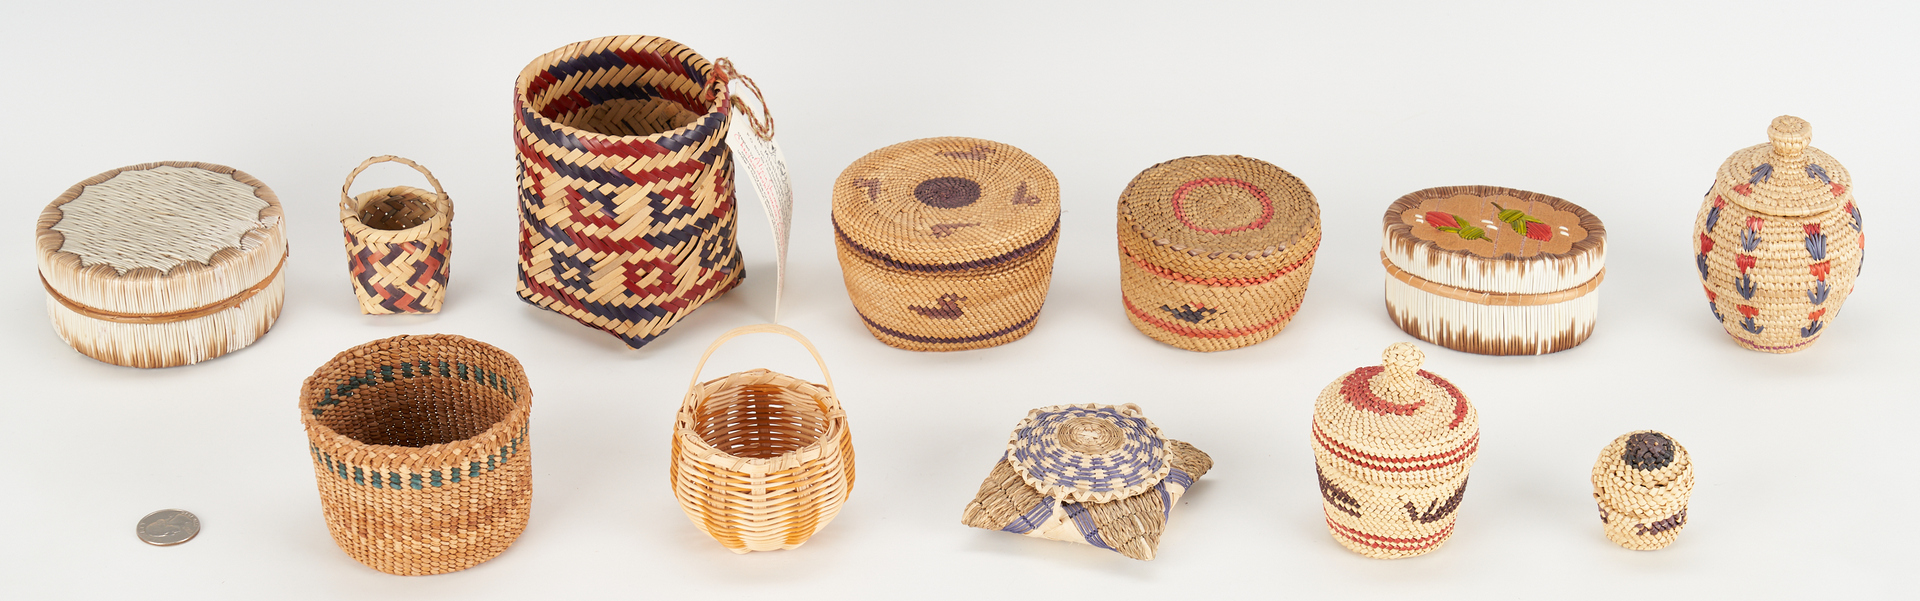 Lot 416: Group of 12 Native American Miniature Baskets & Quill Boxes